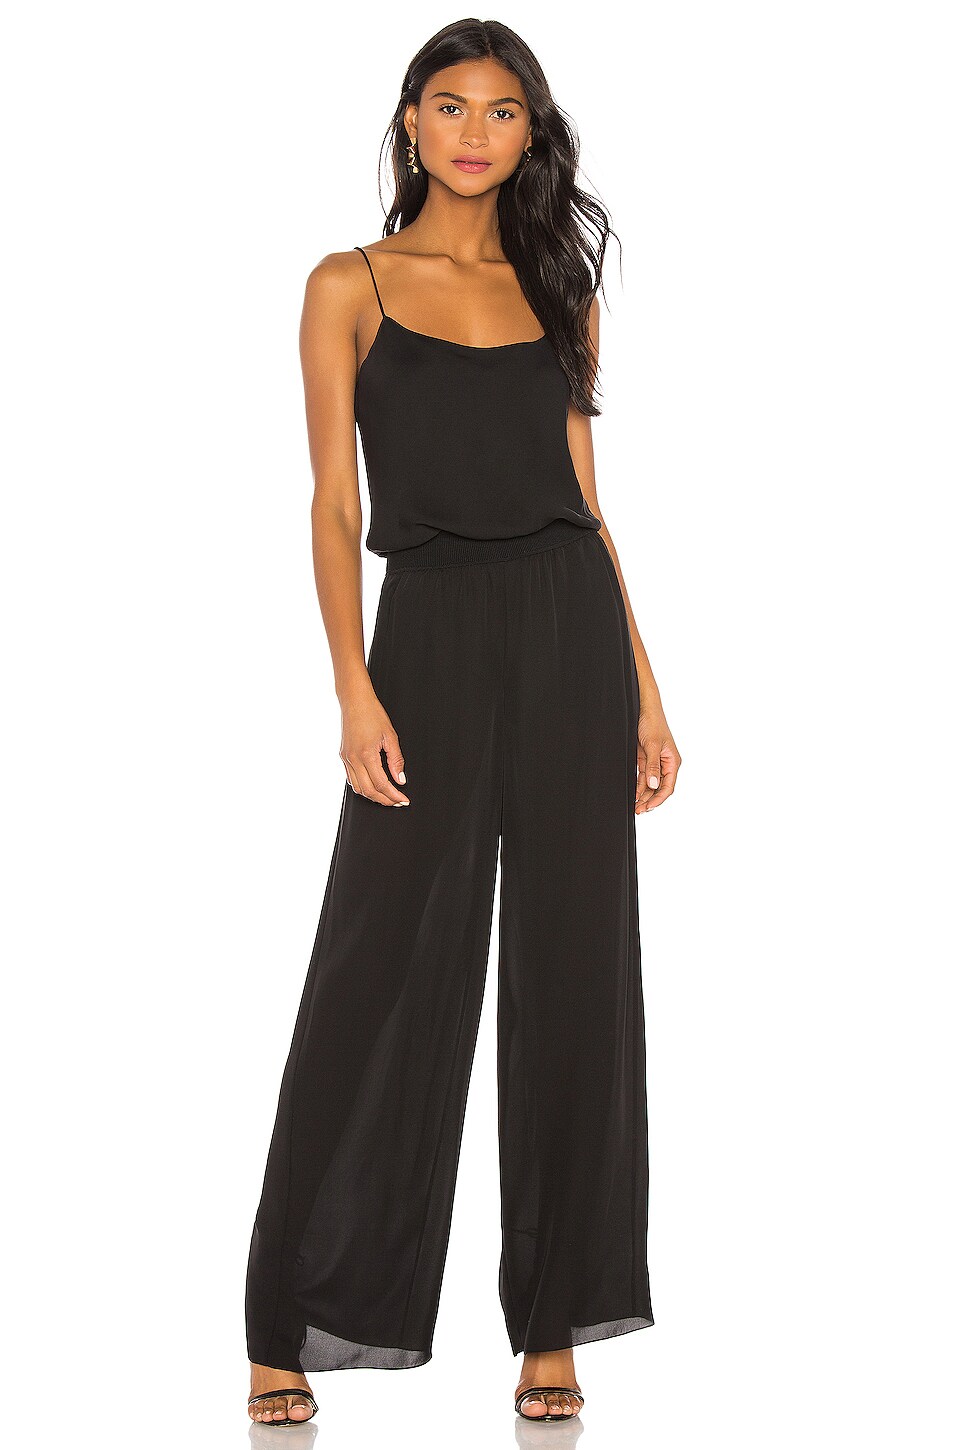 THEORY THEORY RIB WAISTBAND JUMPSUIT IN BLACK.,THEO-WC3